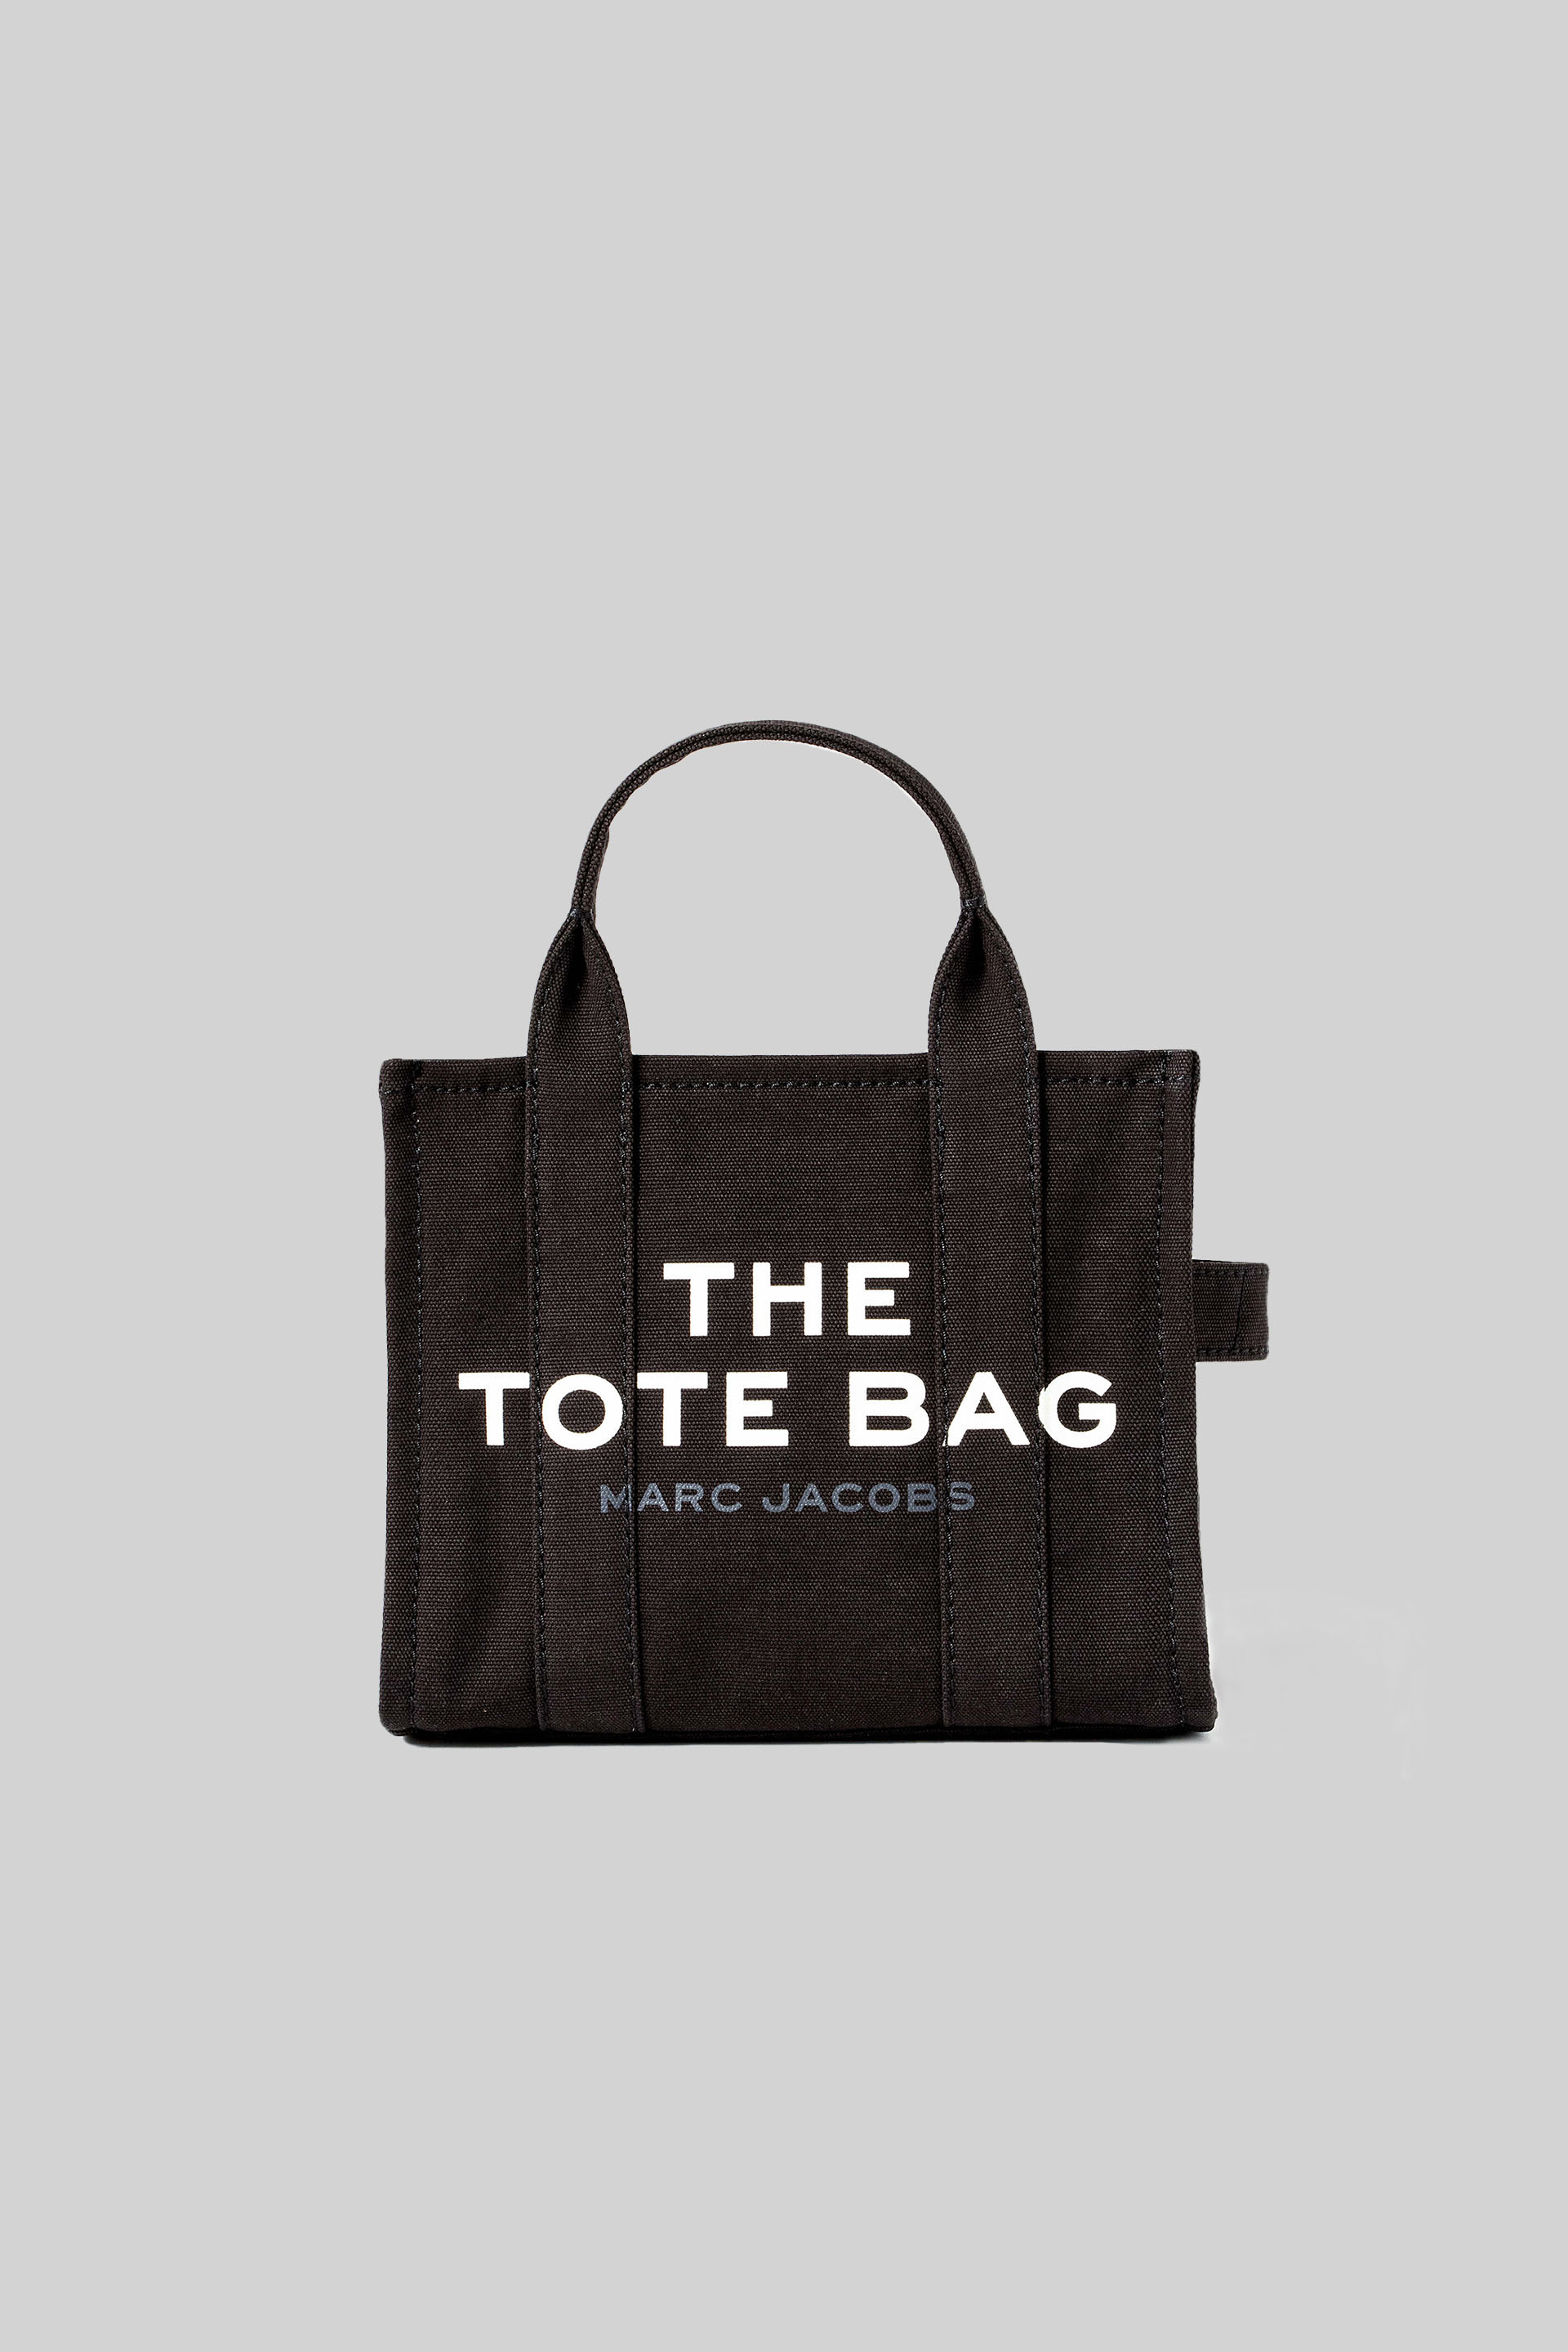 THE MARC JACOBSラインで大人気のキャンバストートバッグ「THE TOTE